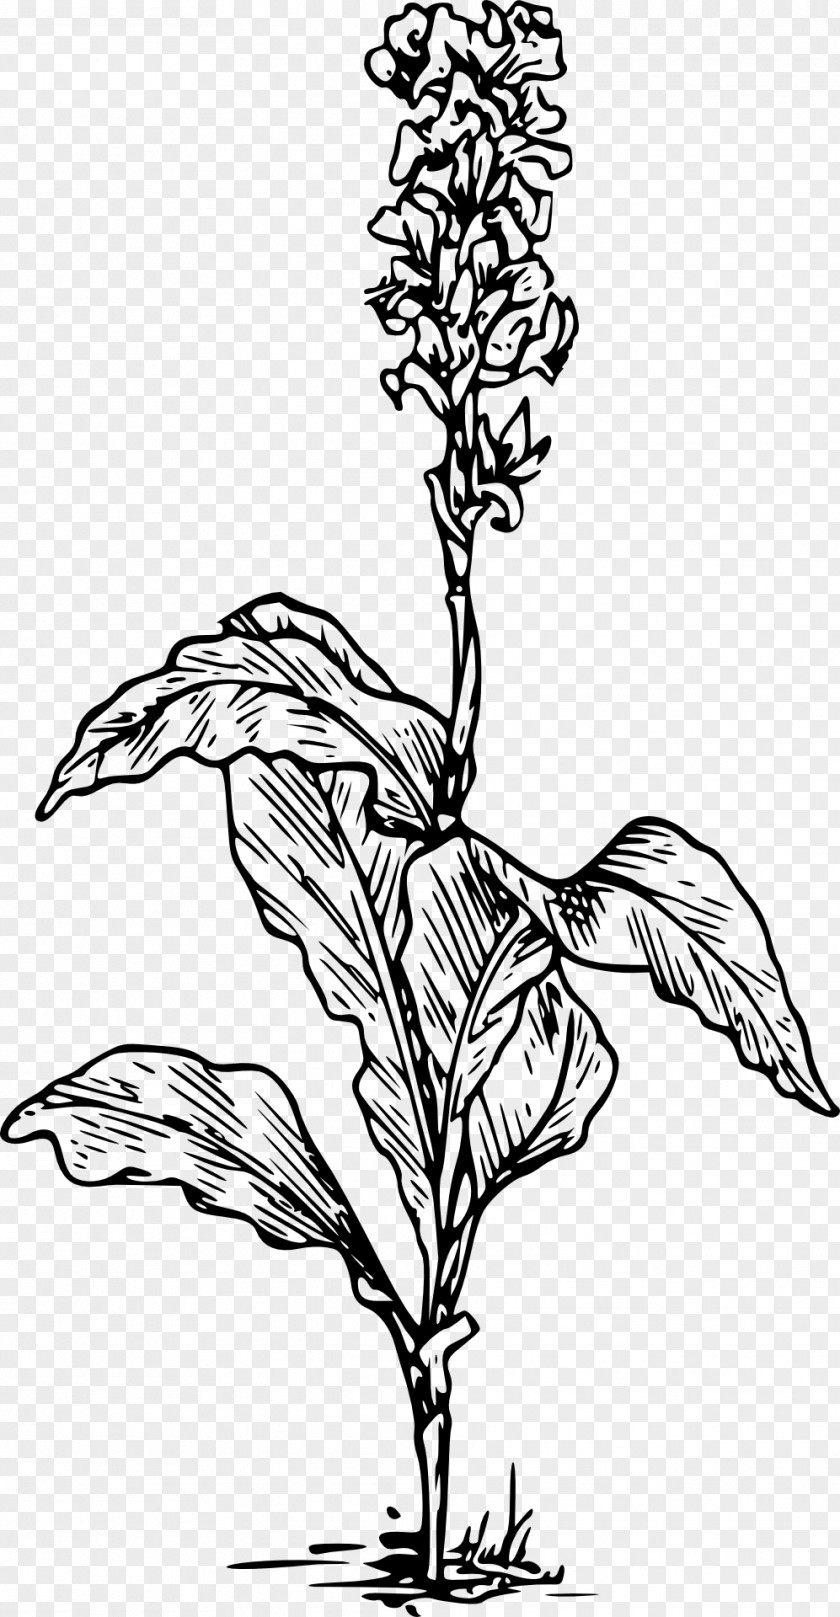 Flower Canna Indica Drawing Arum-lily Lilium PNG